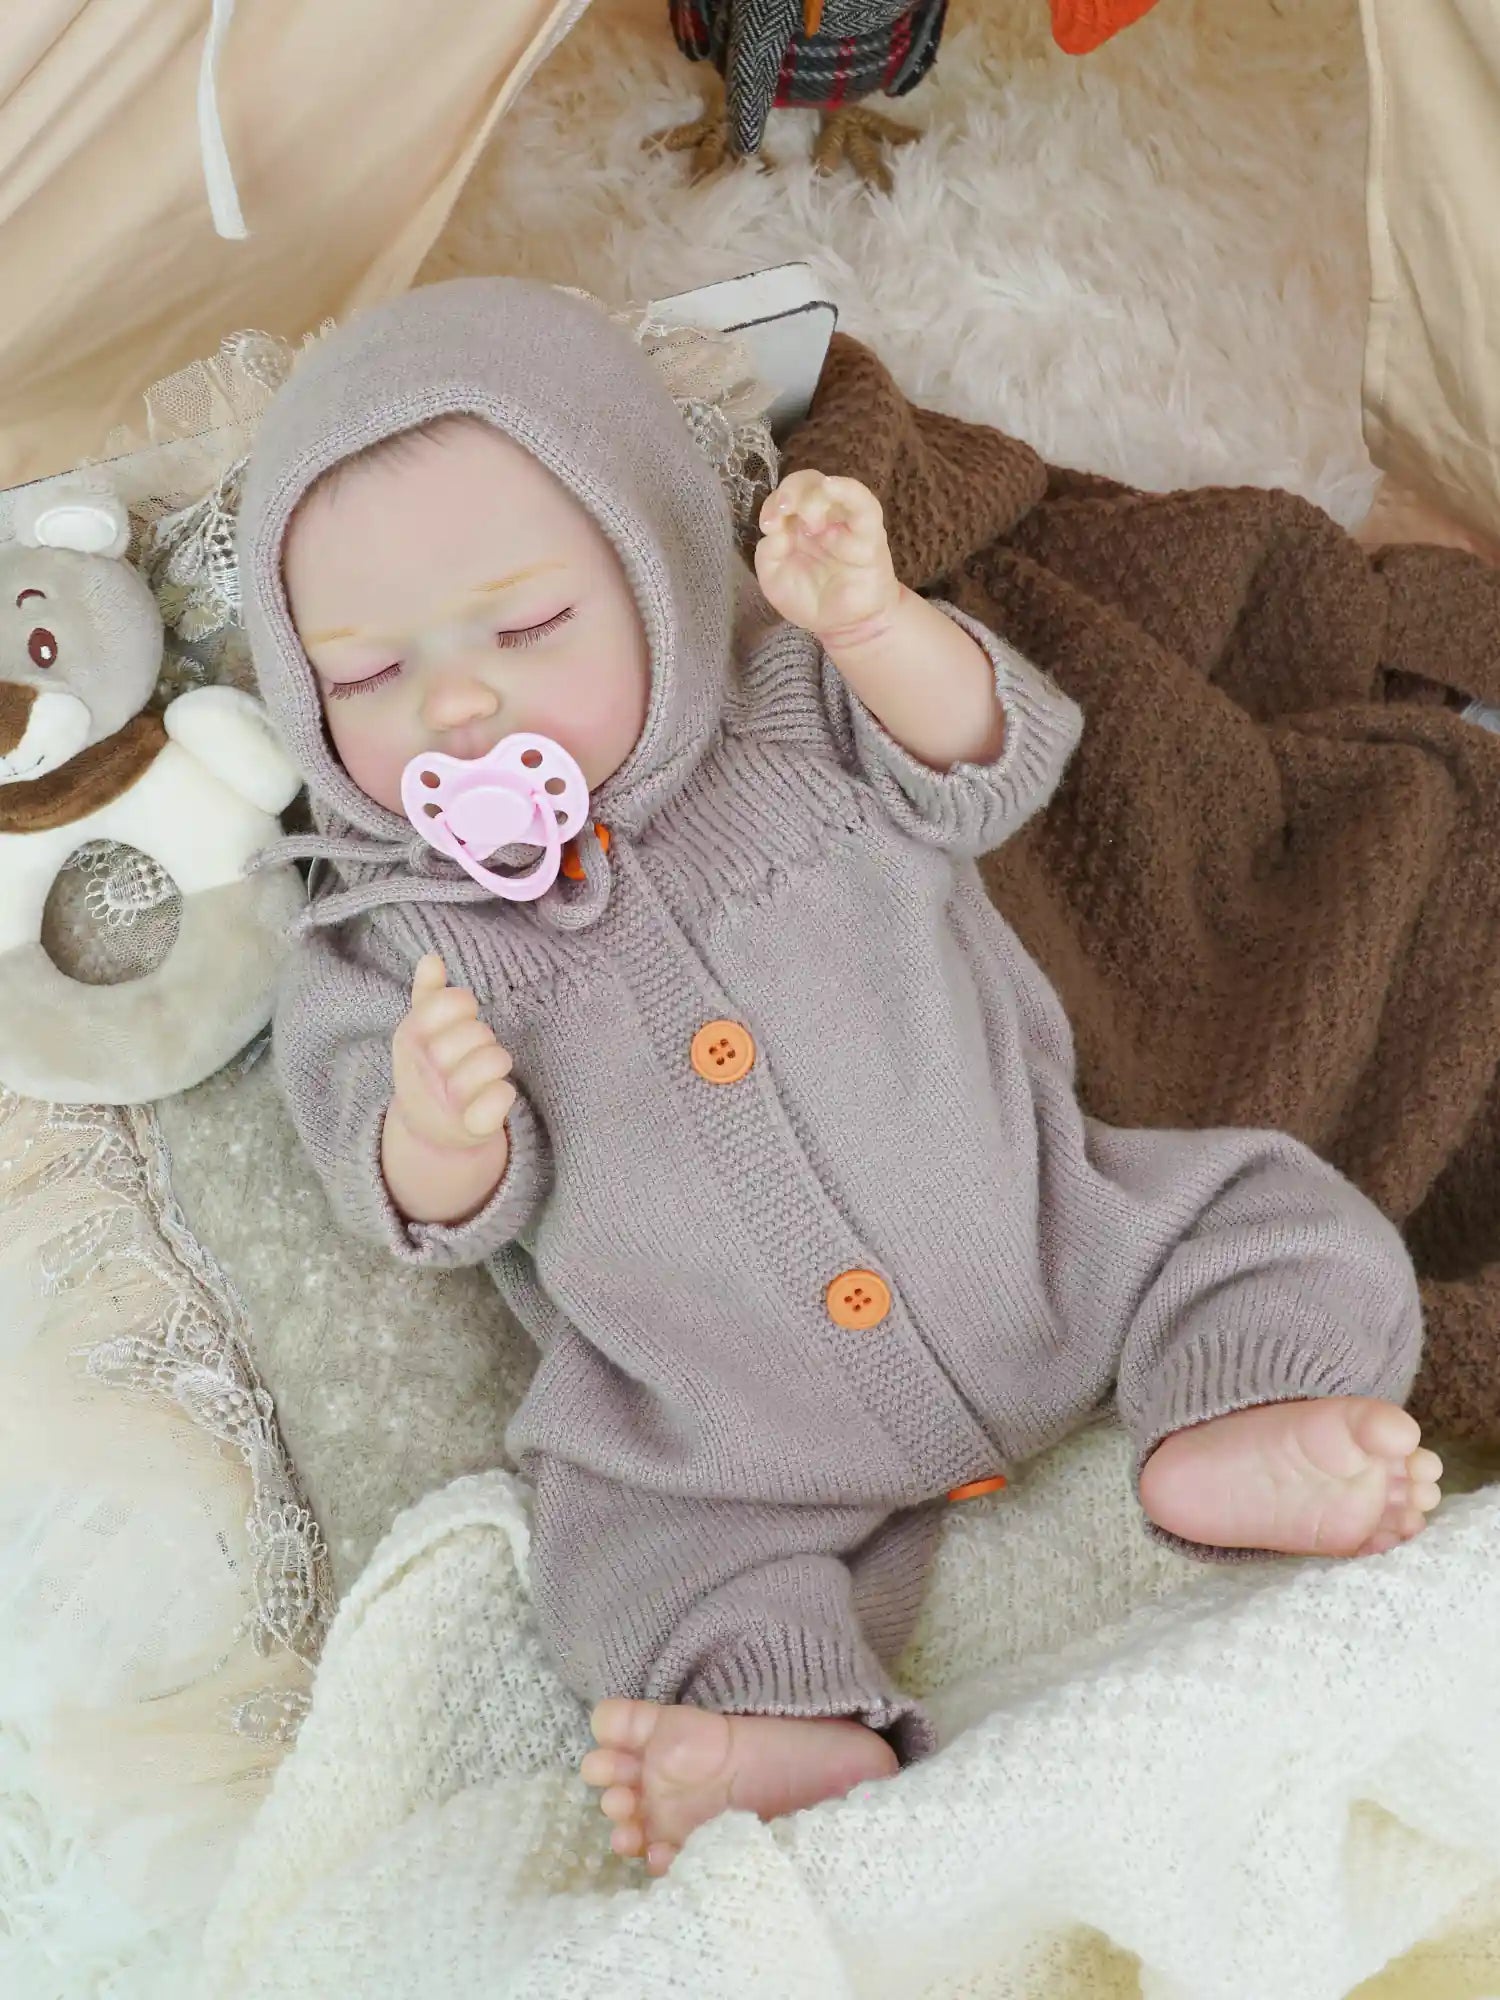 A reborn doll toy dressed in a lilac knitted outfit with a matching hood, laying on a soft white blanket, surrounded by plush toys and a tent background.